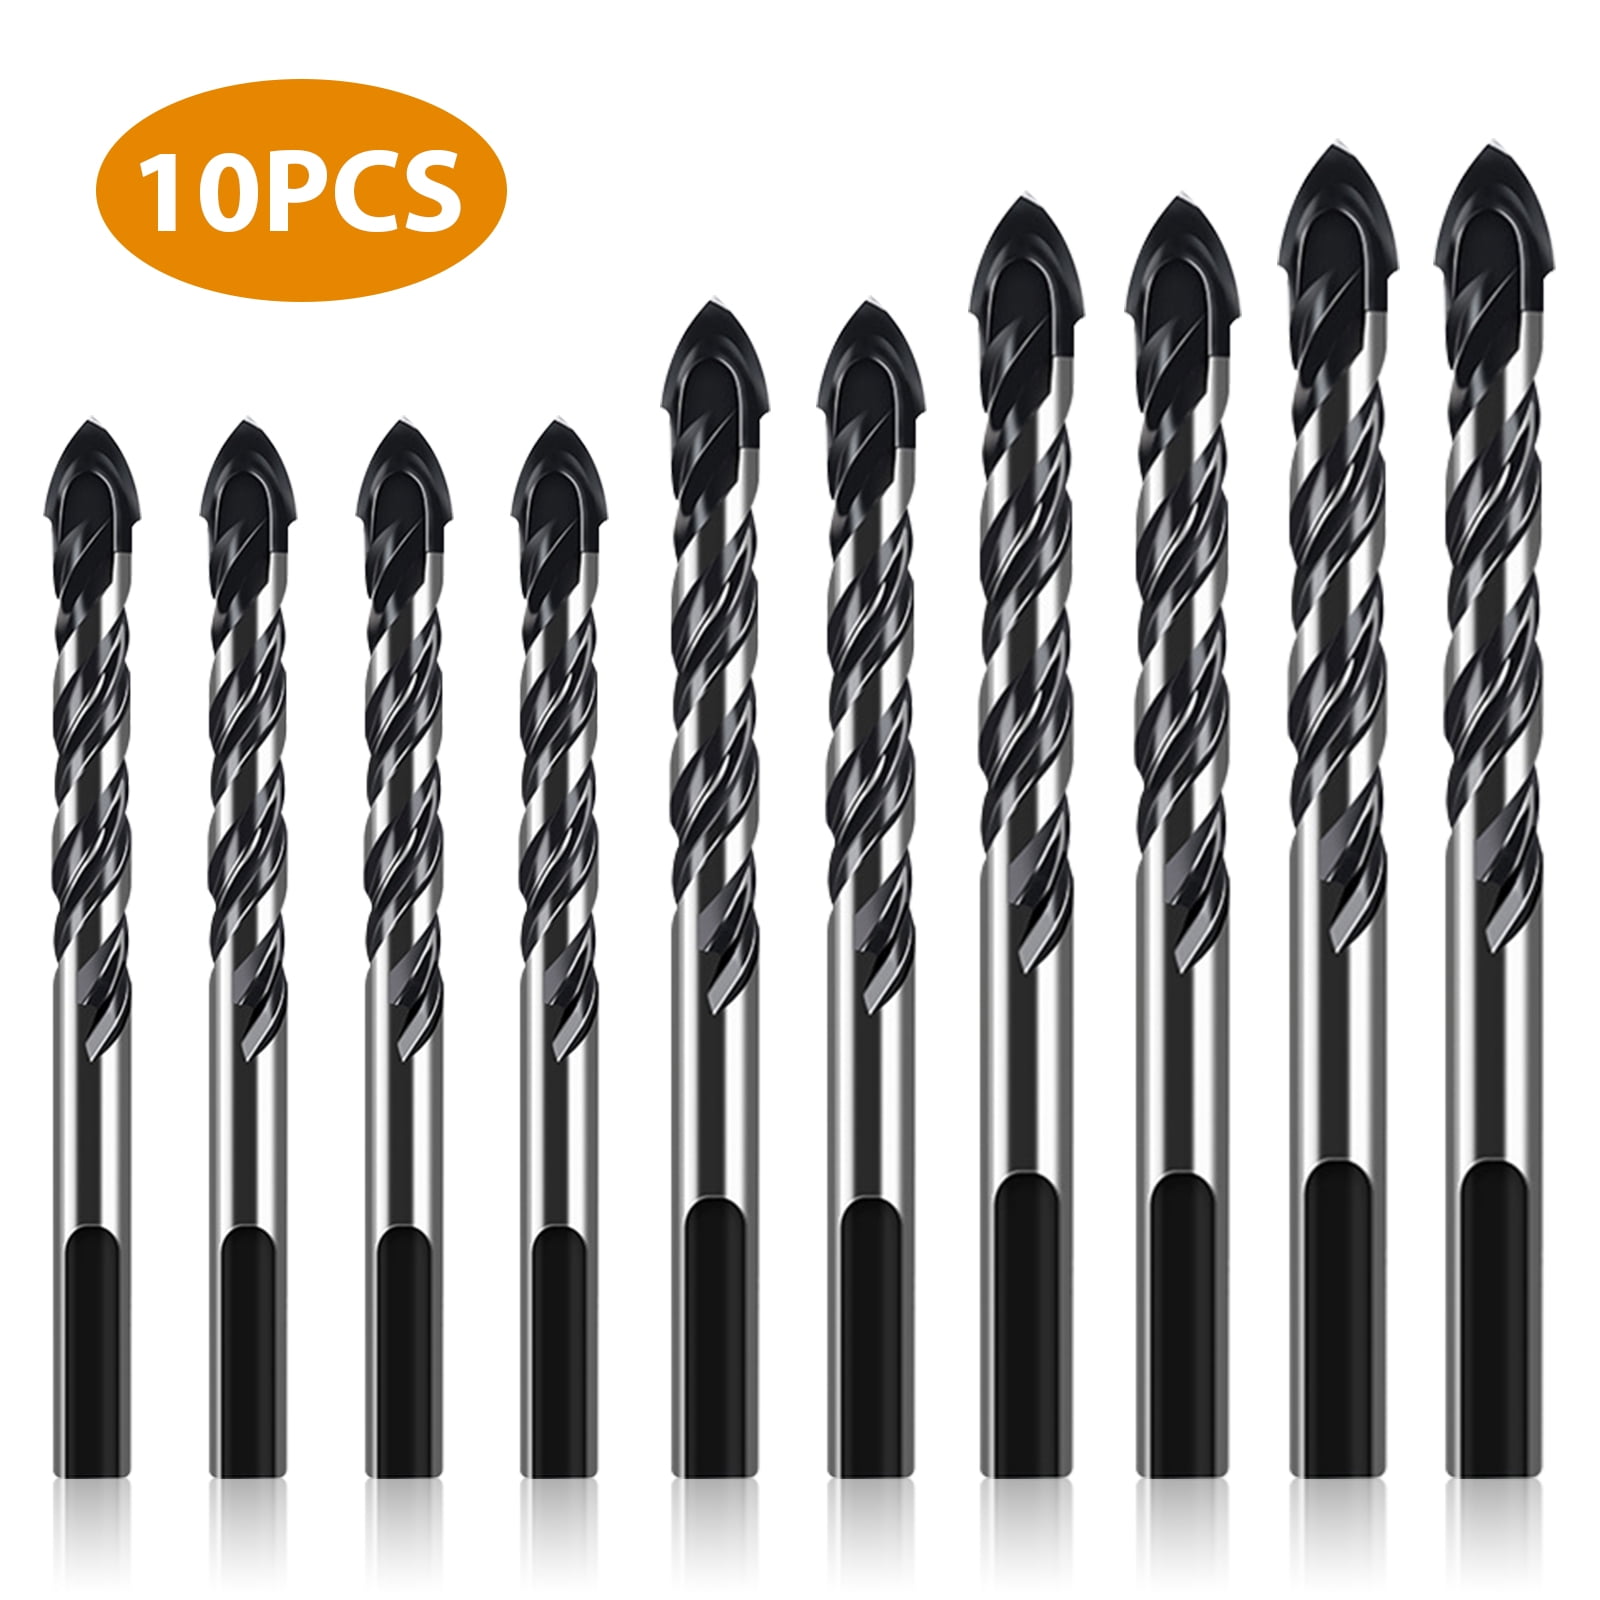 brick concrete wood and marble 3-piece triangular drill bit 3 mm for drilling in ceramics tile glass